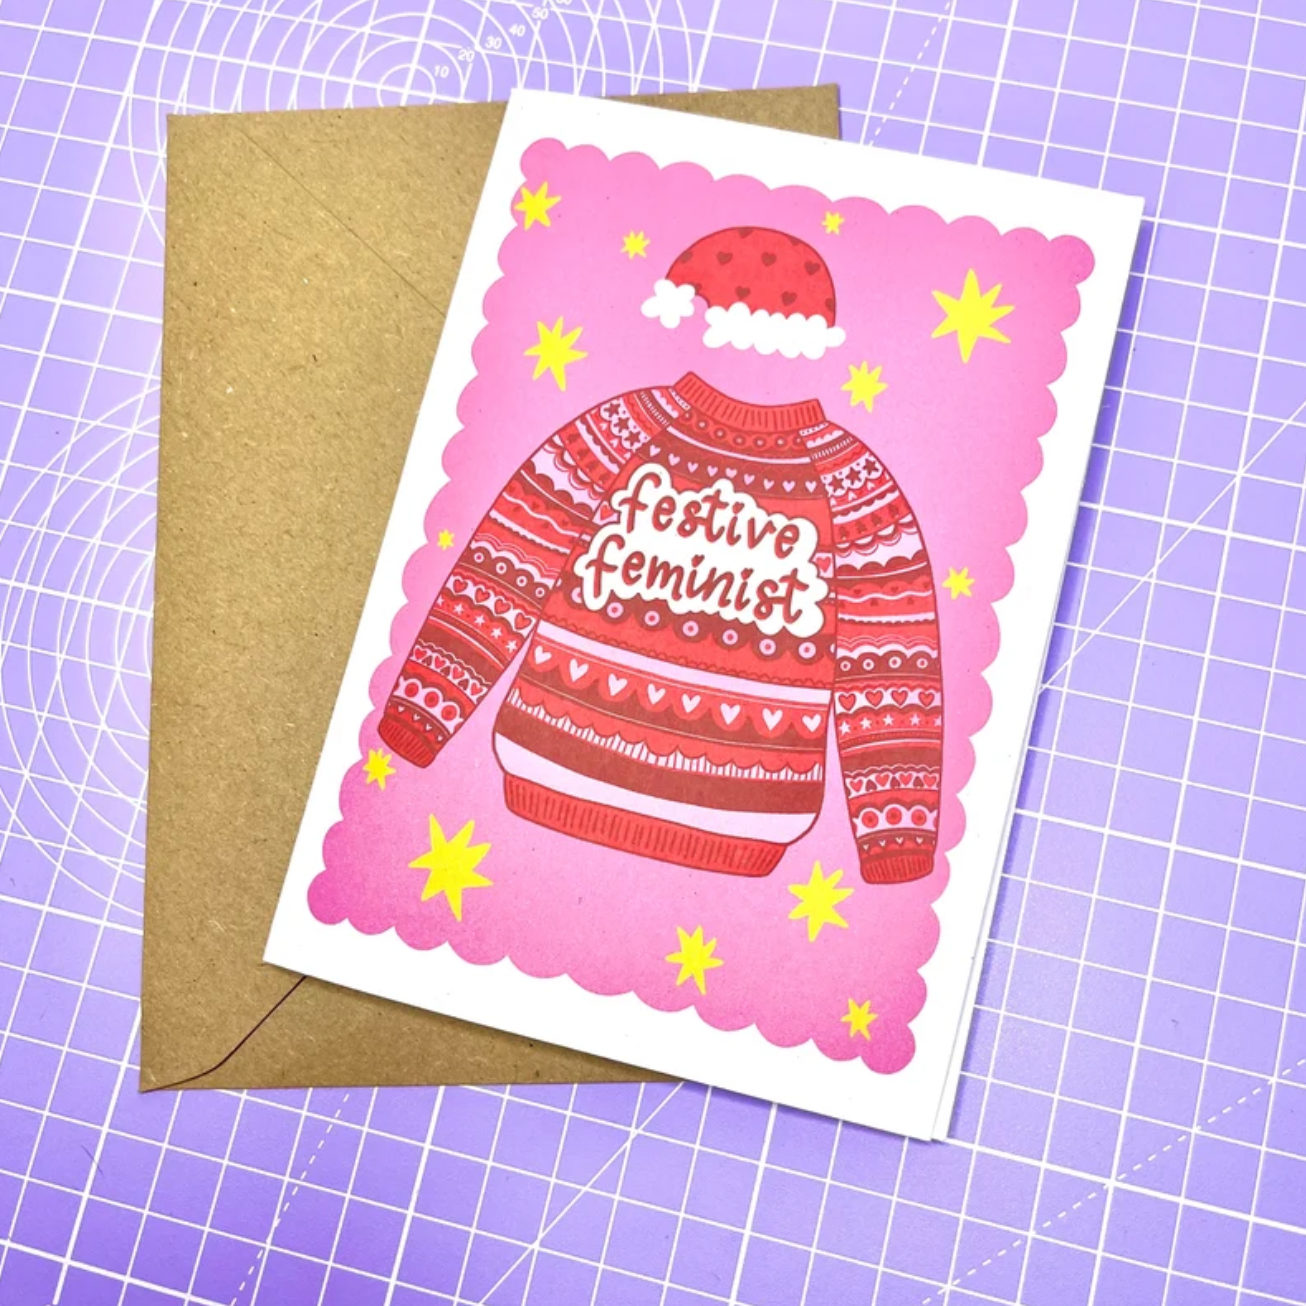 Christmas Cards - Self Love and Feminist Themed